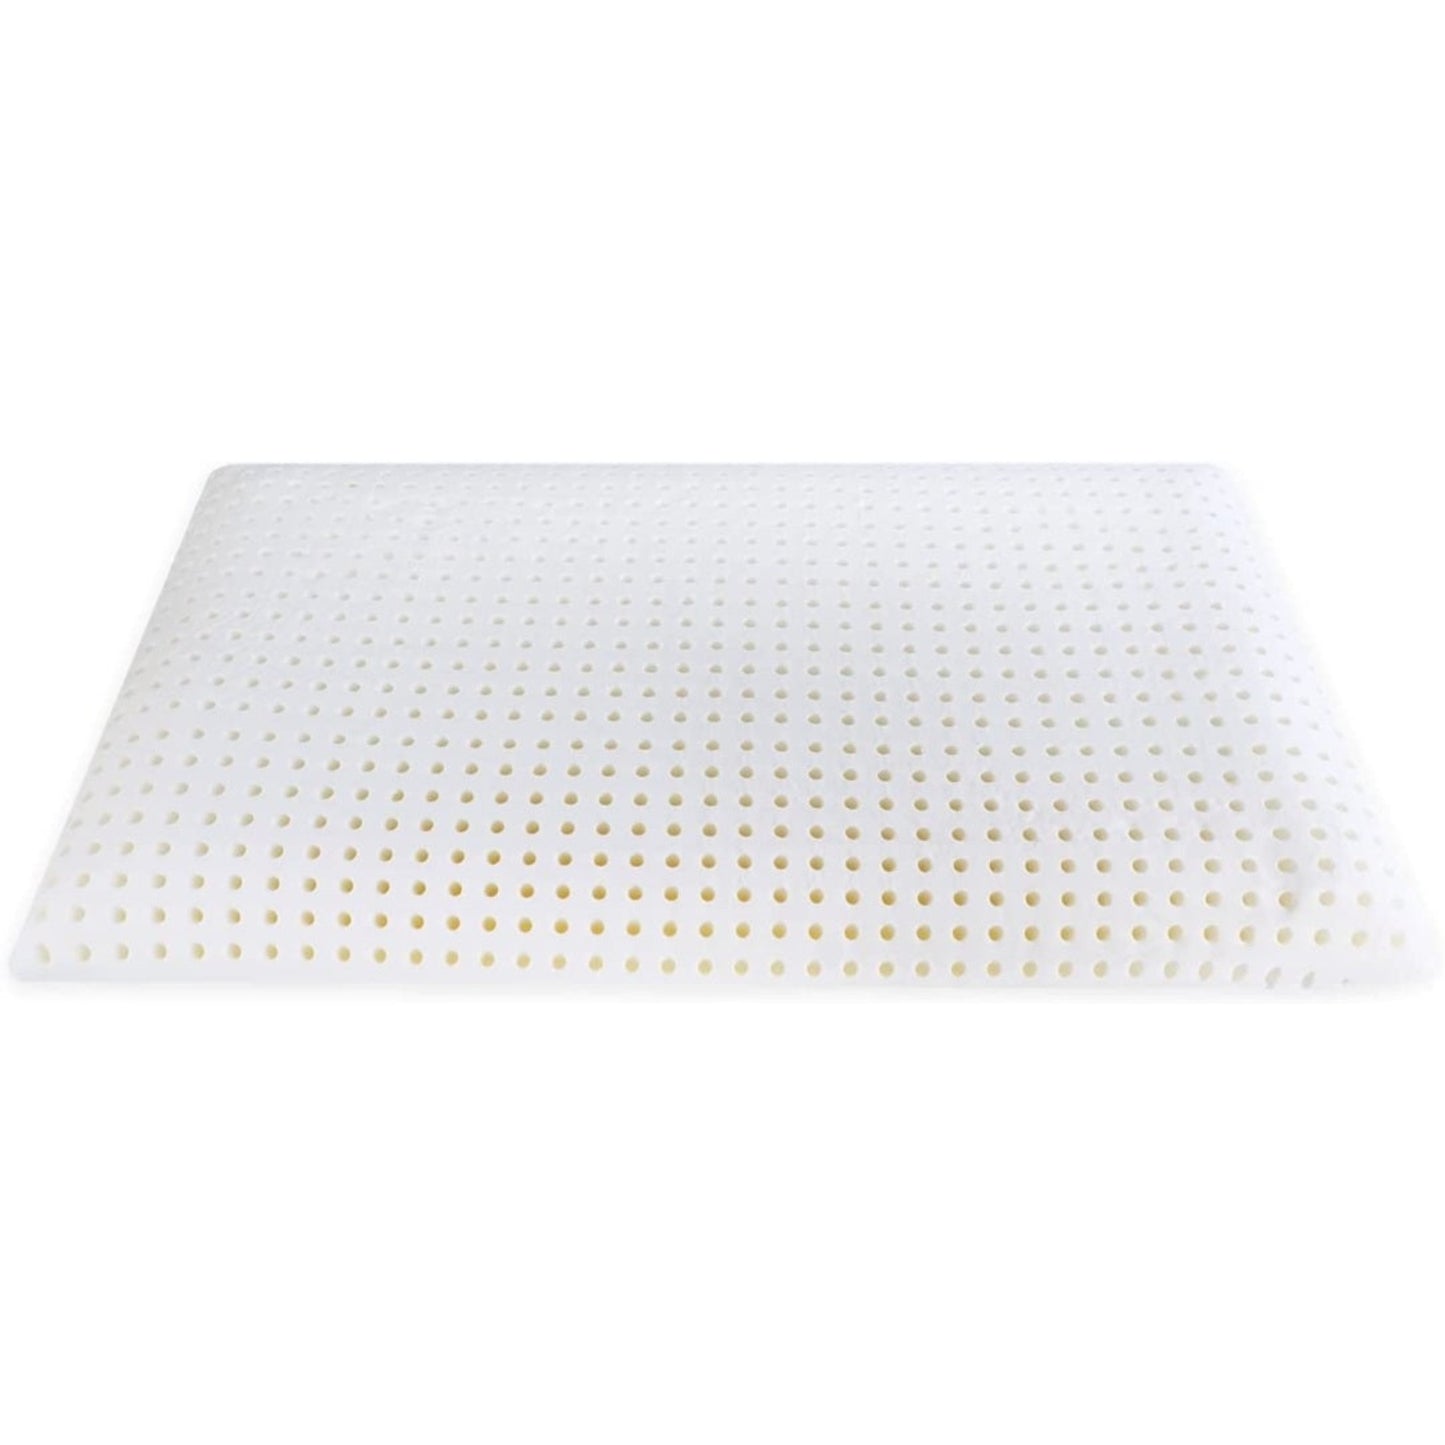 Viscous Memory Pillow Foam with holes for better ventilation. 